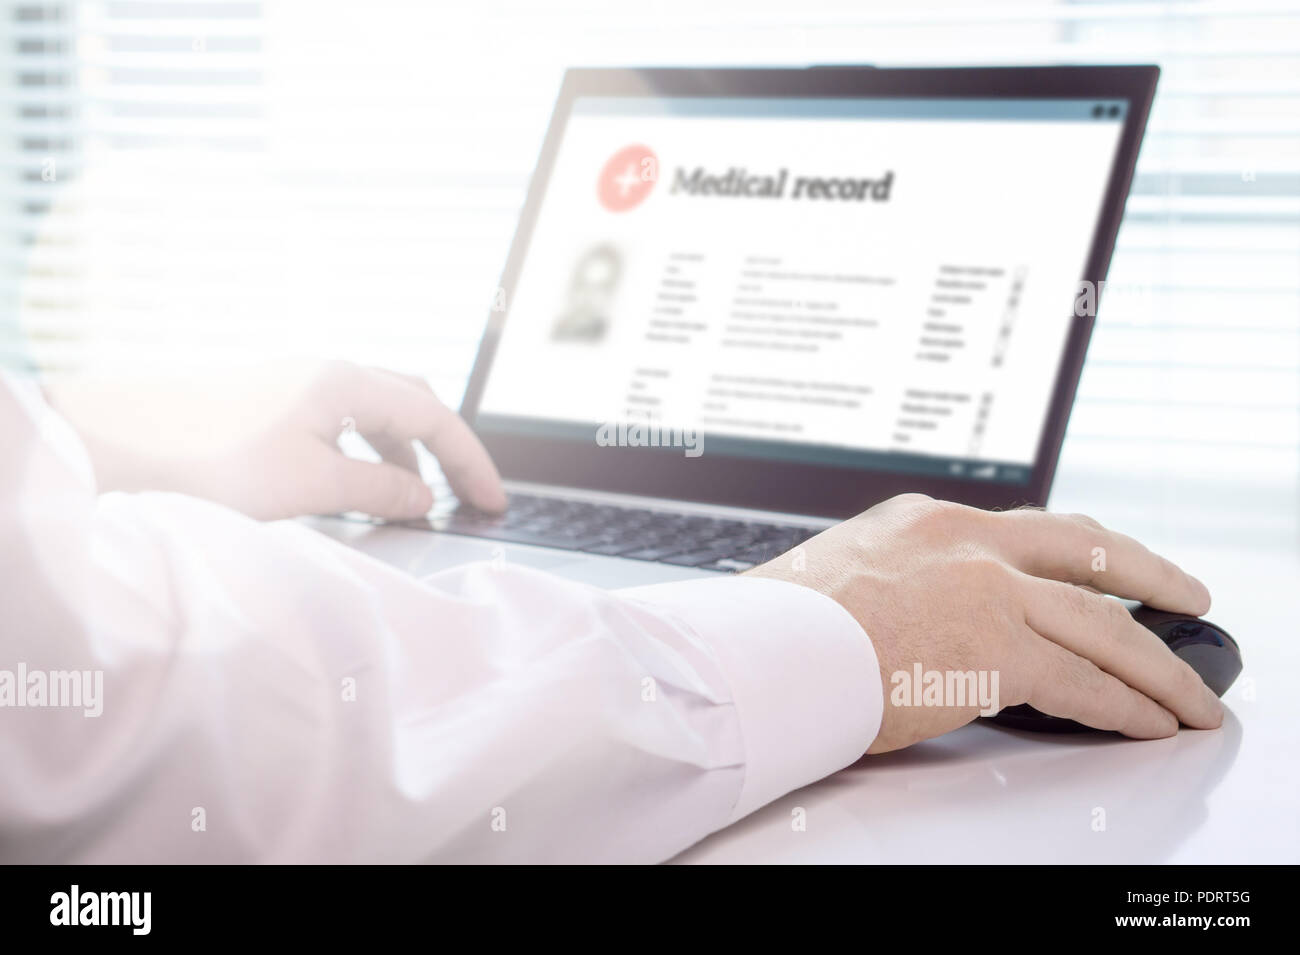 Doctor using laptop and electronic medical record (EMR) system. Digital database of patient's health care and personal information on computer screen. Stock Photo